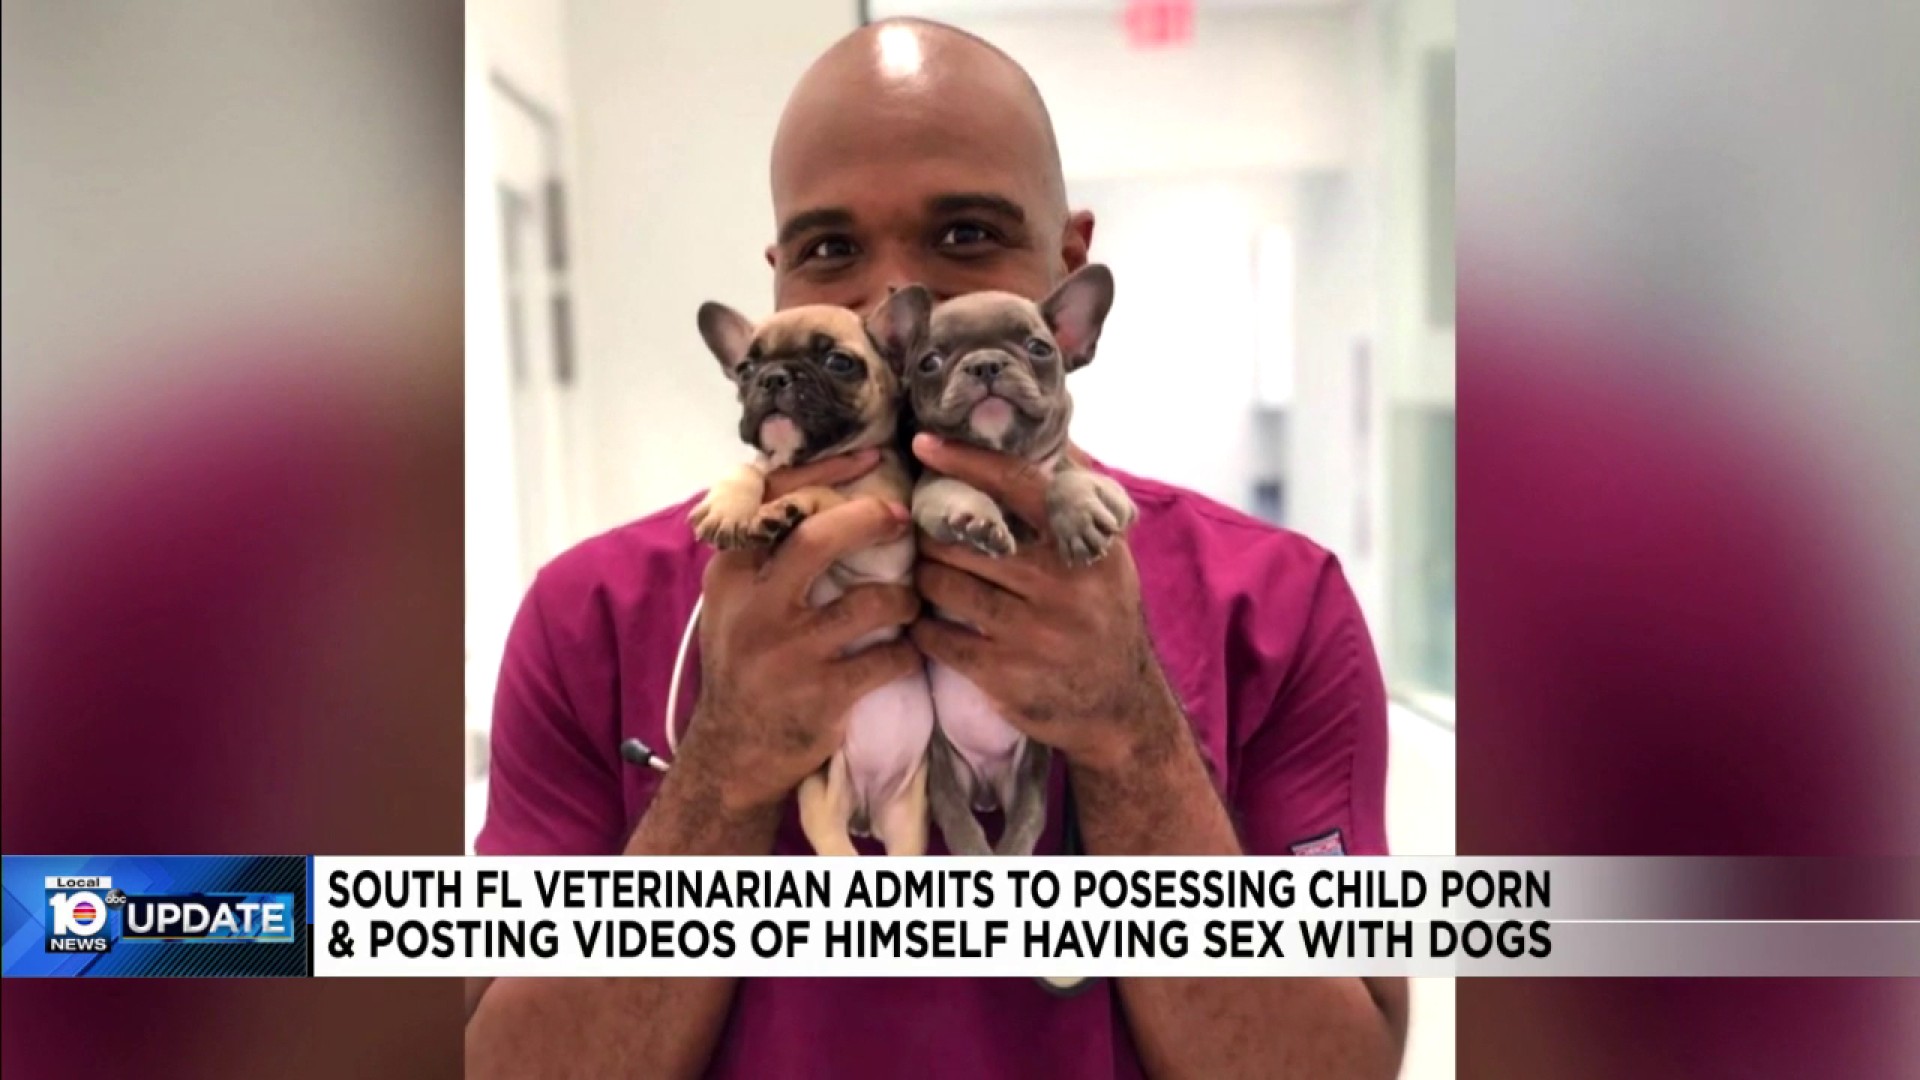 With pets sex Canada Legalizes